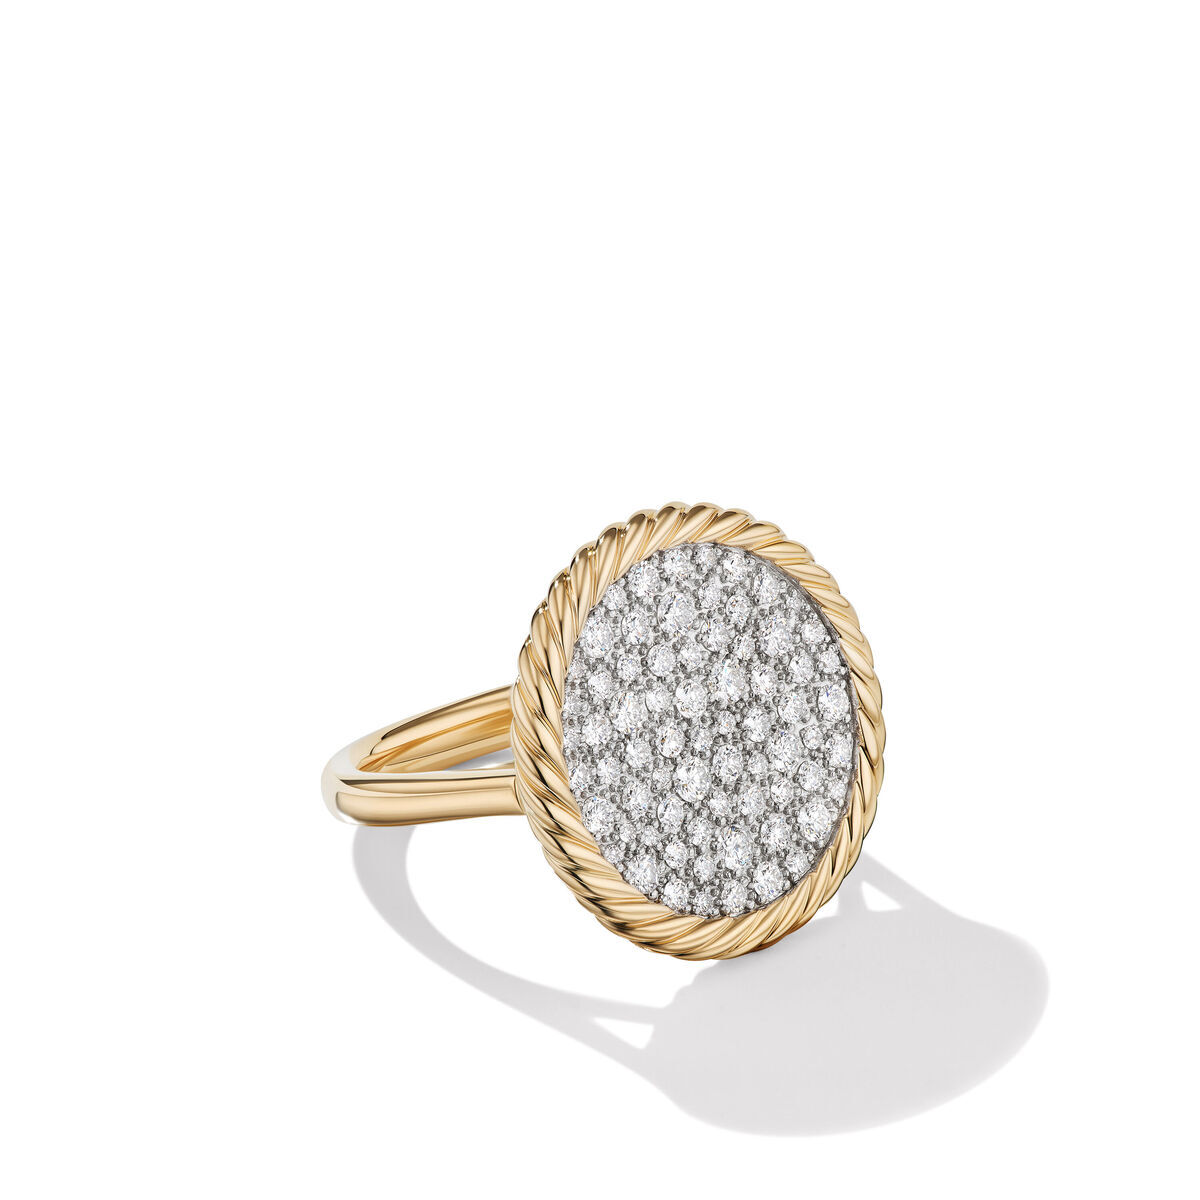 David Yurman DY Elements Ring in 18K Yellow Gold with Pave Diamonds - Size 6